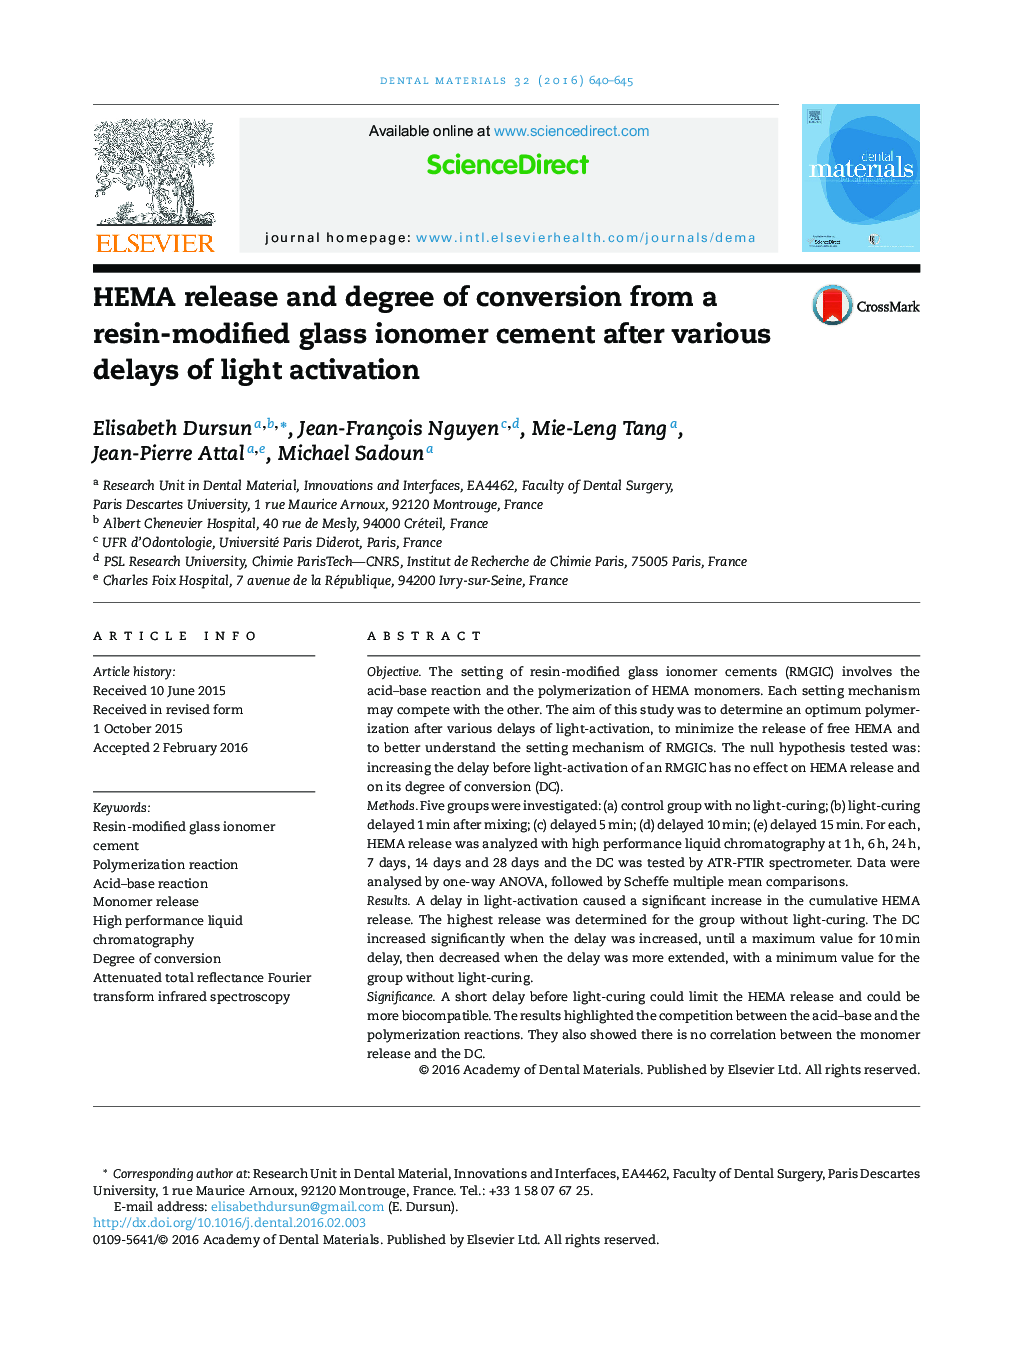 HEMA release and degree of conversion from a resin-modified glass ionomer cement after various delays of light activation